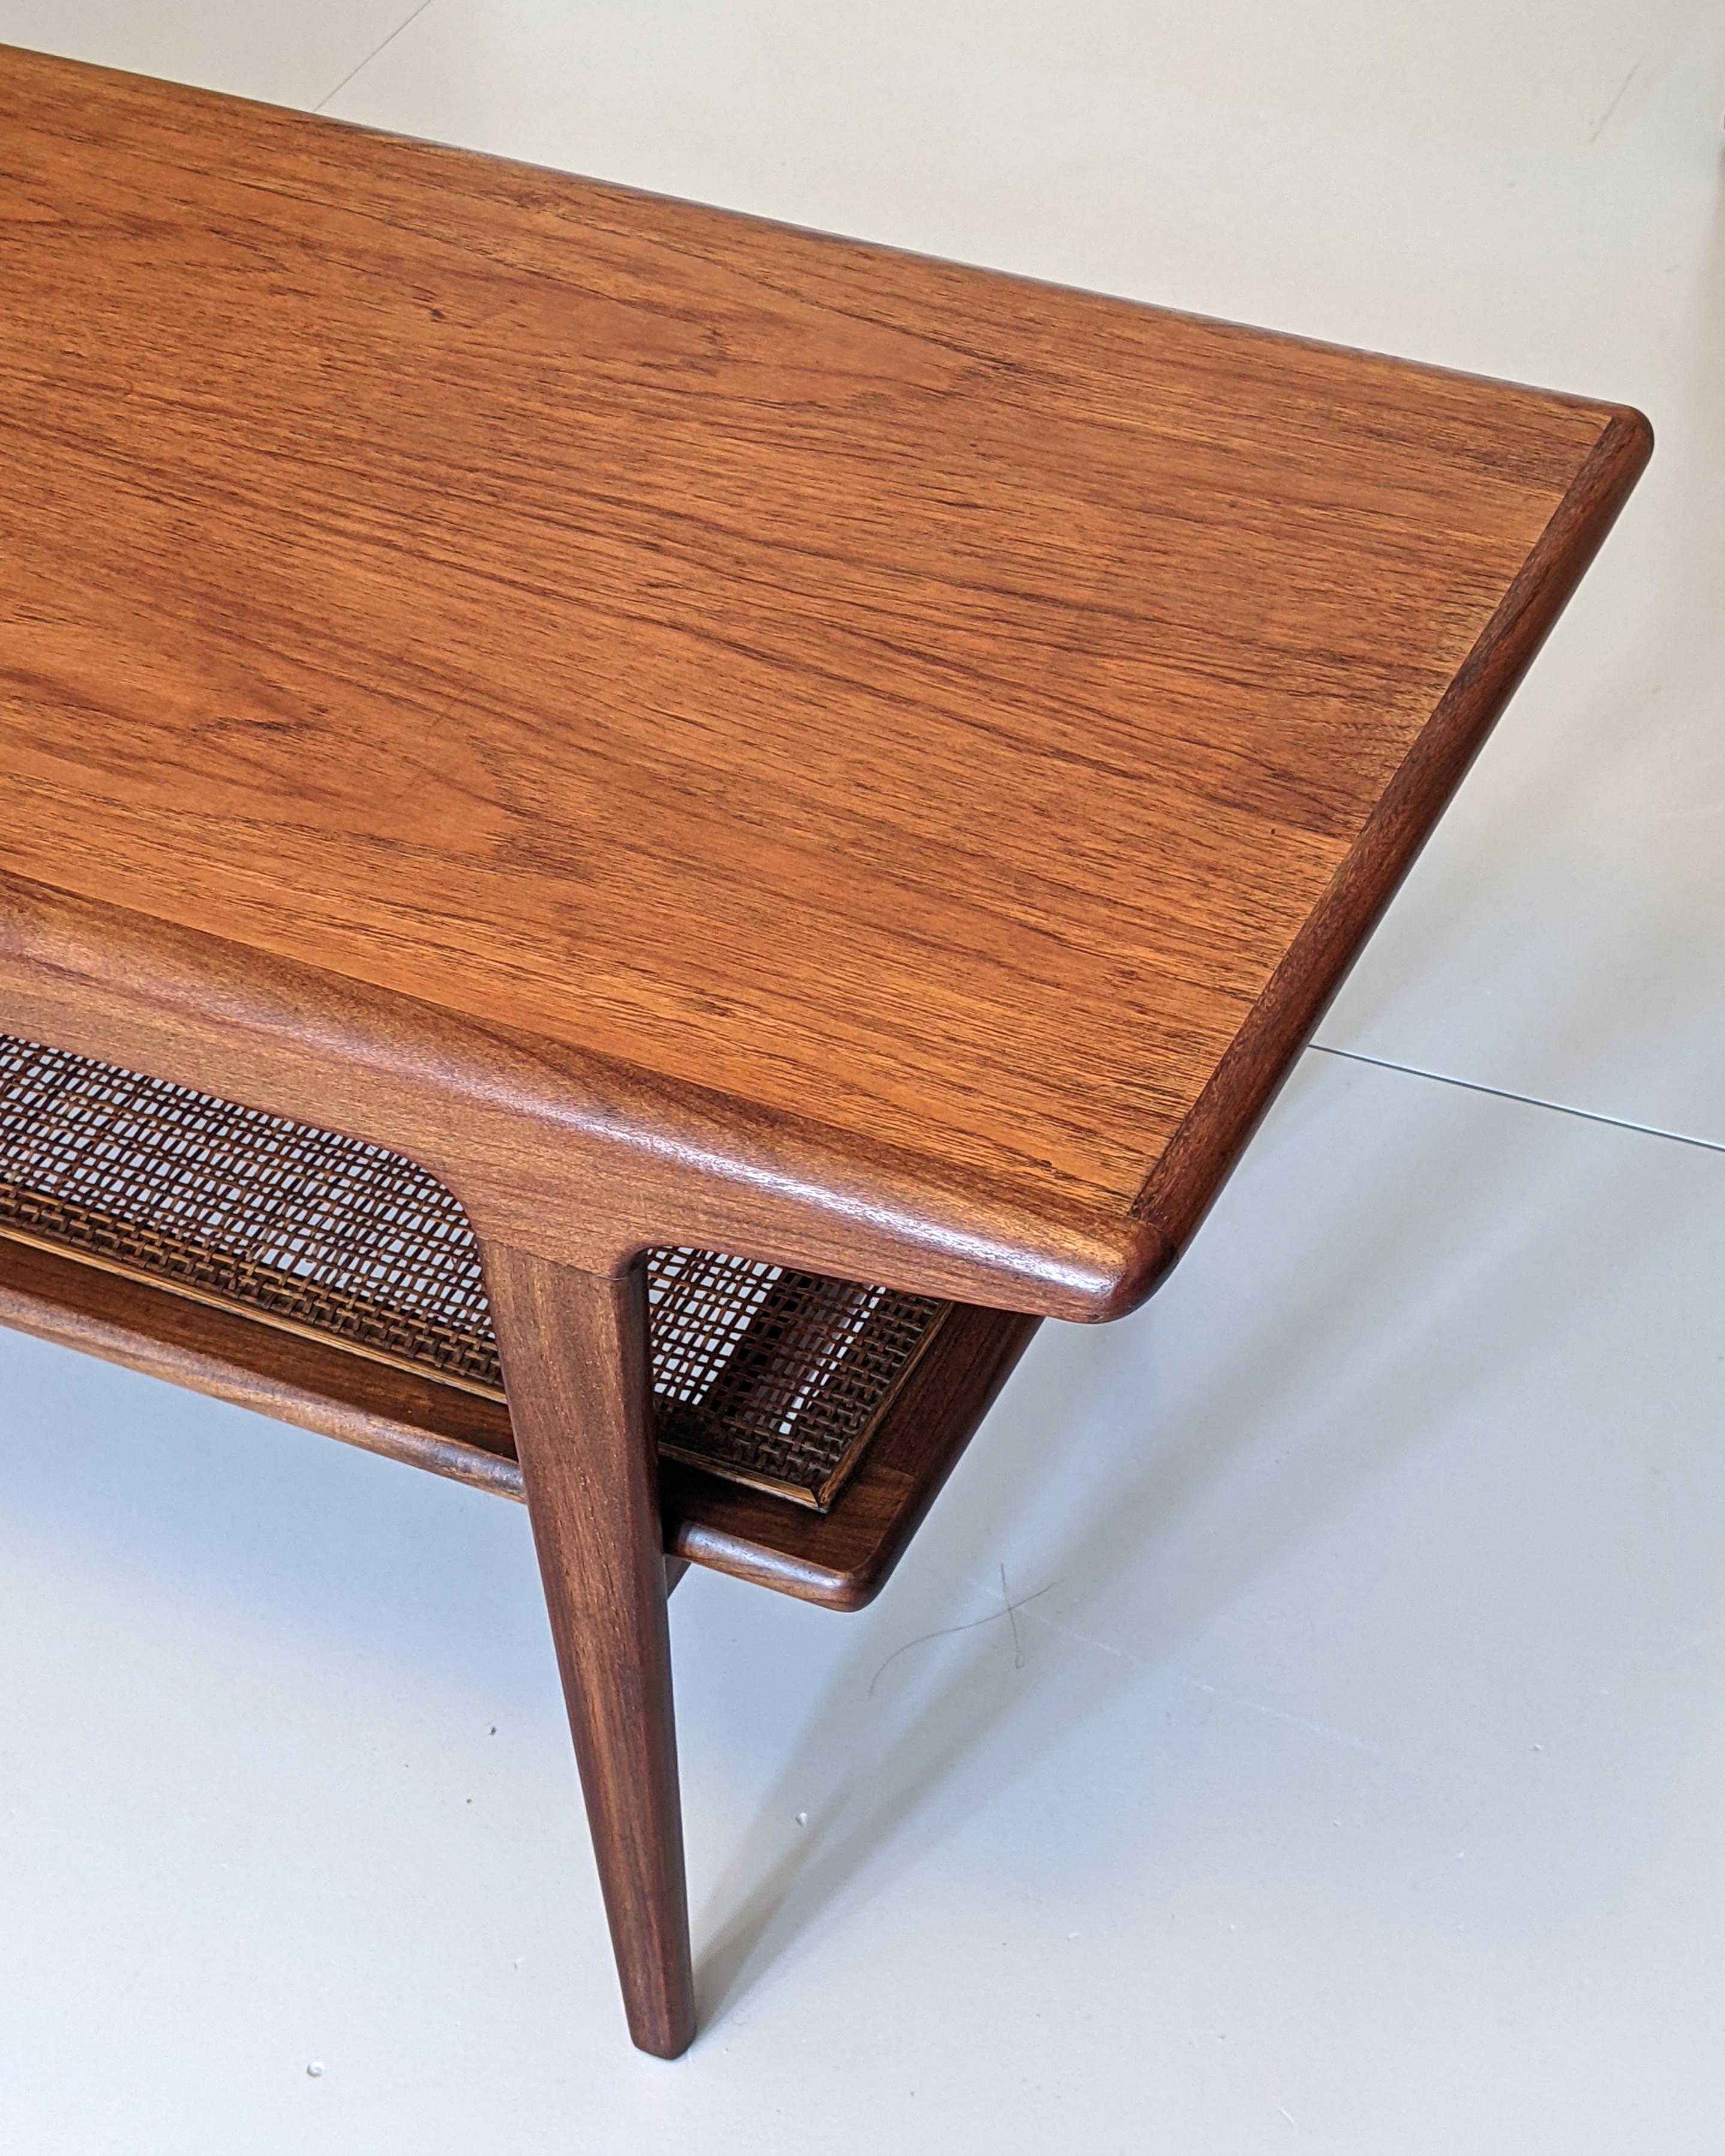 Mid-20th Century John Herbert for Younger, Mid Century Danish Style Teak and Cane Coffee Table